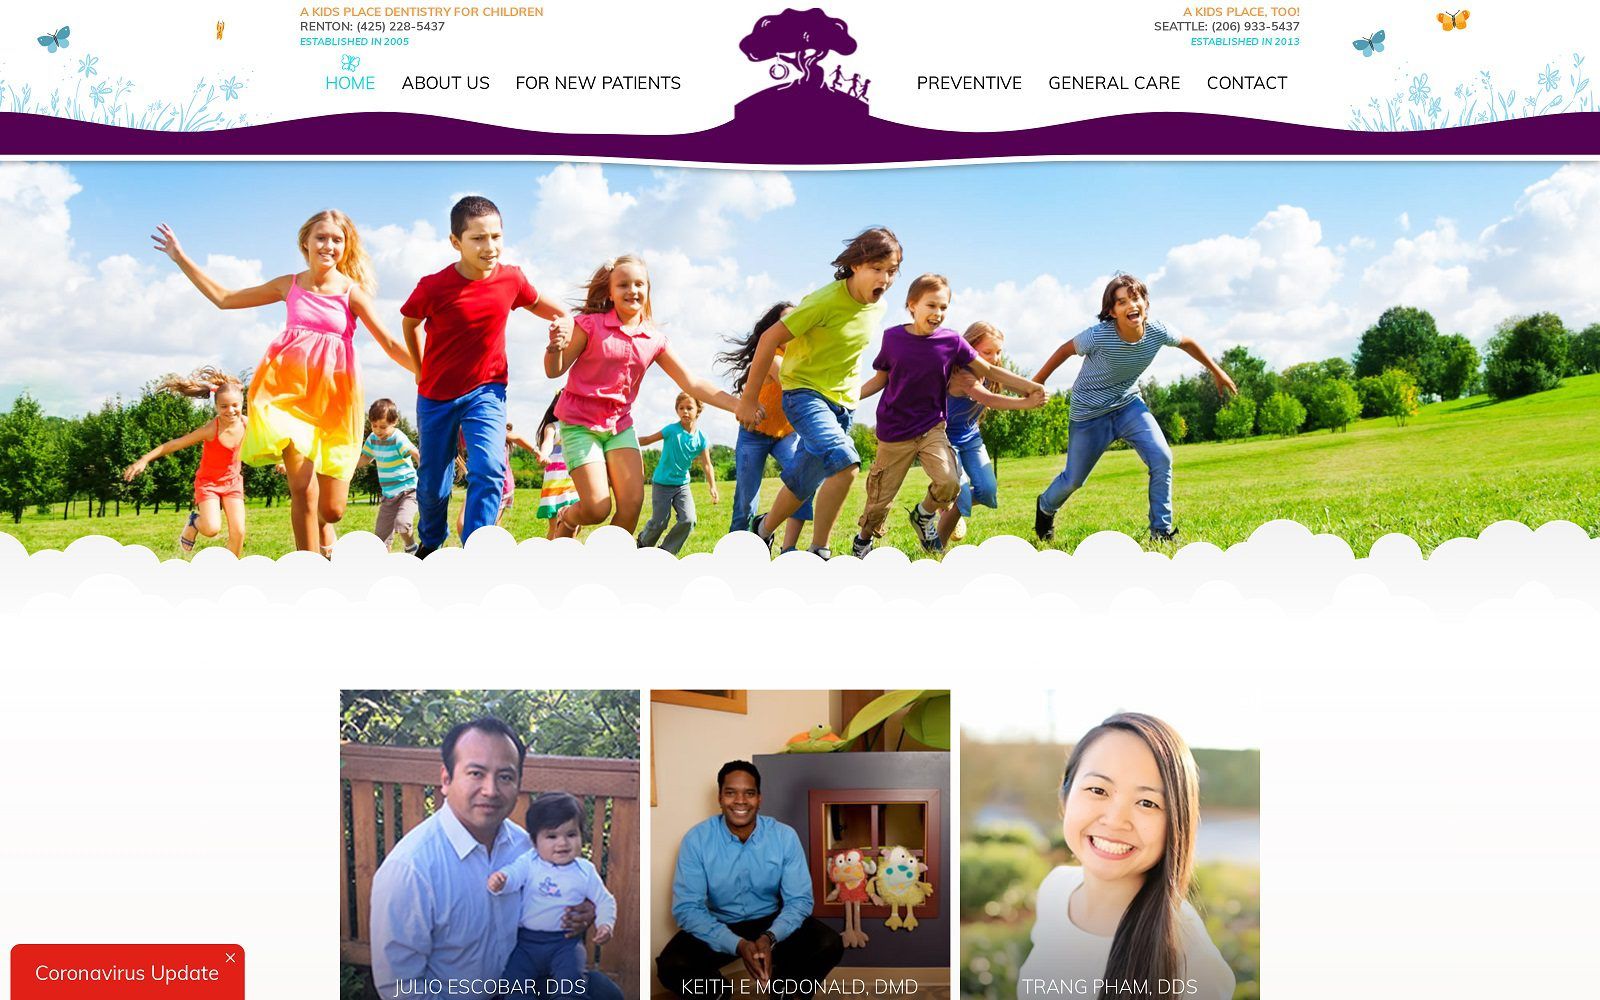 The screenshot of a kid's place too! Dentistry for children website